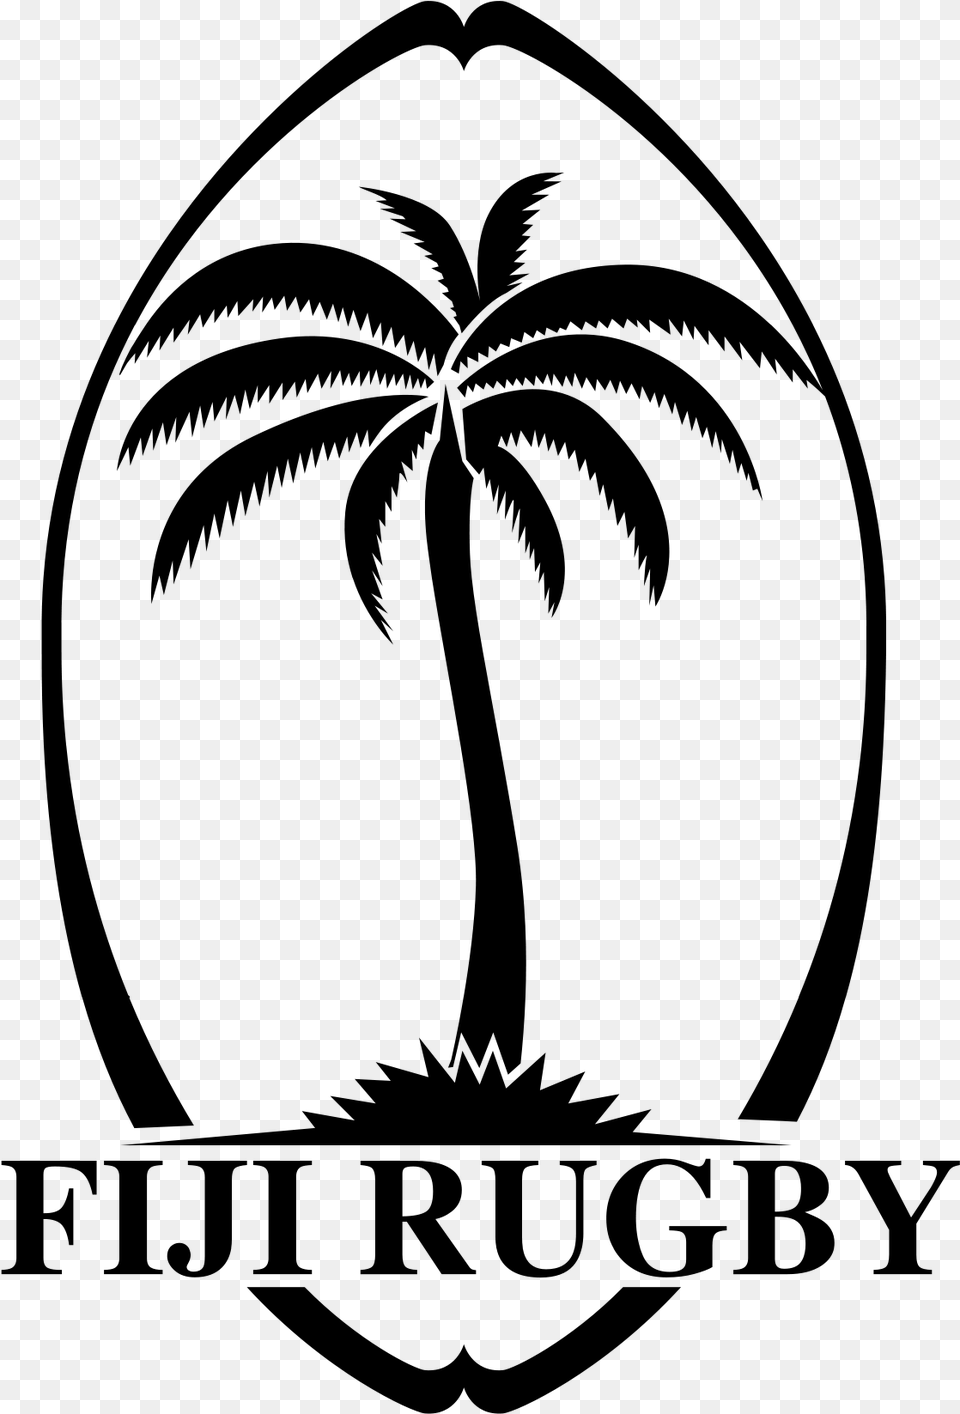 Fiji Rugby Union Logo, Gray Png Image